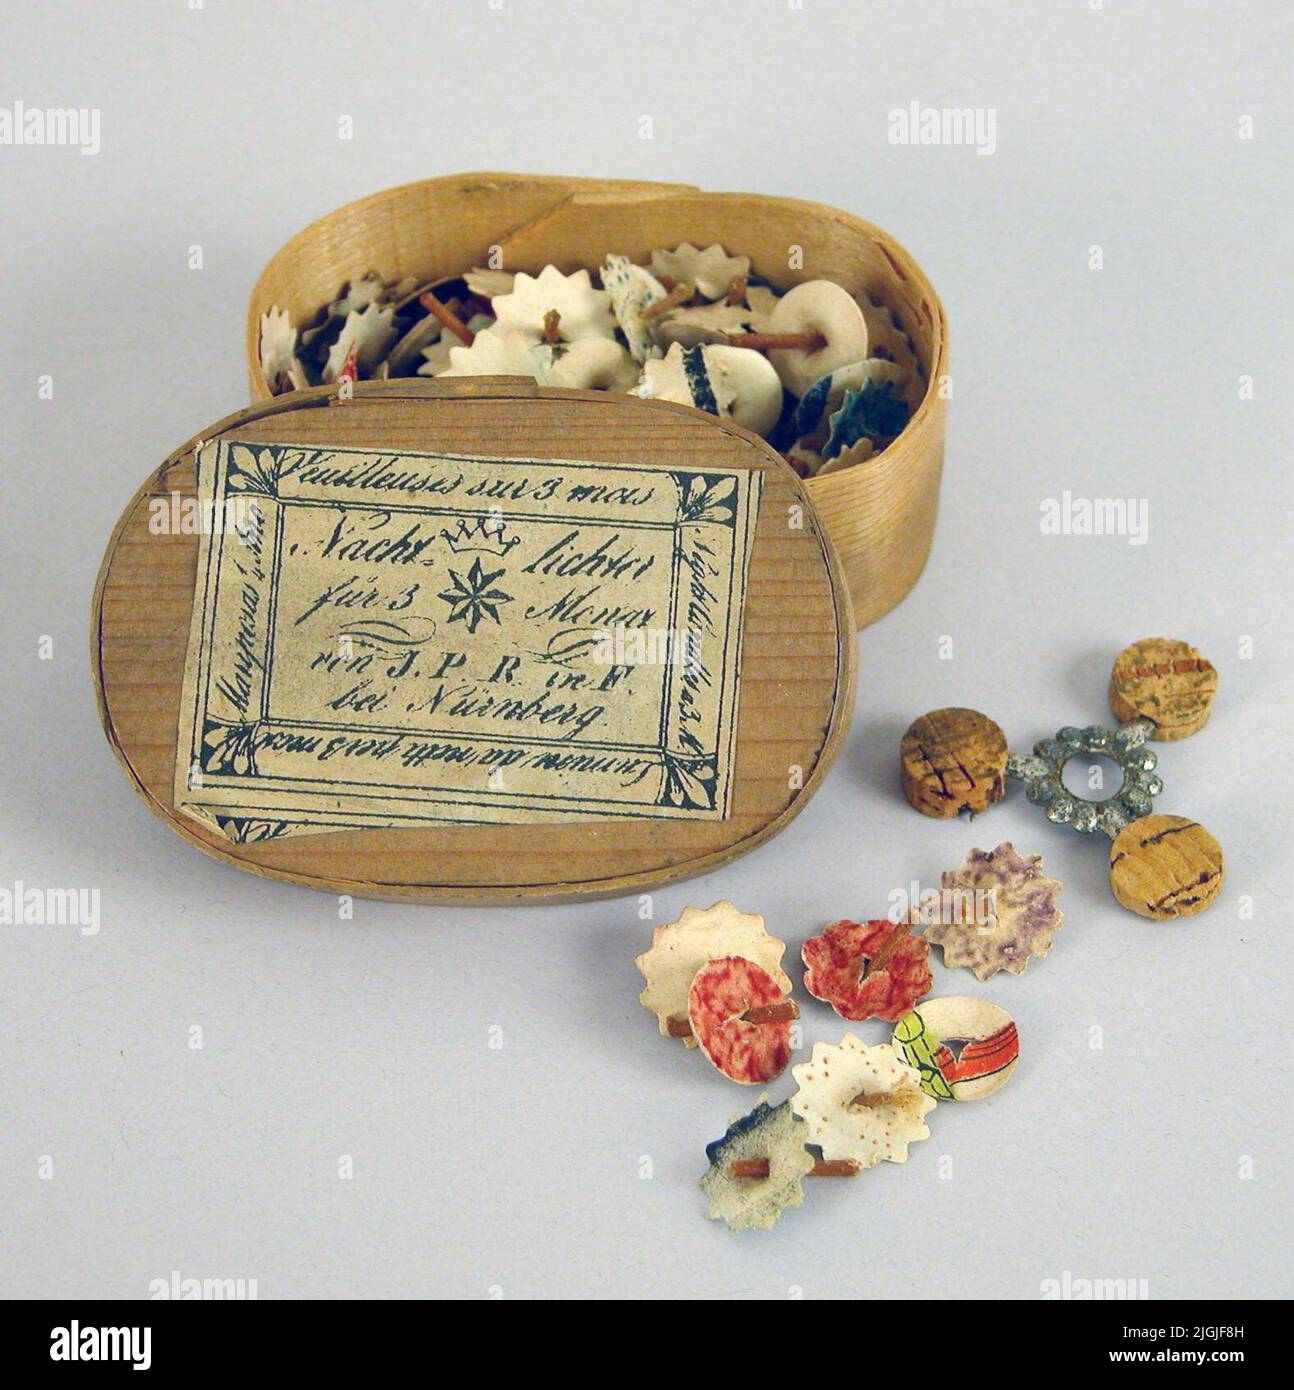 Nattljus Light, so -called. Night light. Oval box of shavings with paper label. In the box a variety of small wanders in round paper flowers in different colors and patterns. Float scaffolding metal and cork. The box's talent white with black handwritten text in different languages: 'Nachtlichter für 3 Menax von J.P.R. in F. Bei Nürnberg' etc. The wicks were placed in the float in a clay lamp or container filled with water and predatory oil. According to a label, they last for three months. Gift 1934 by Miss Ada Brolin, Karlskrona.Neg no: 92.120, 15 Stock Photo